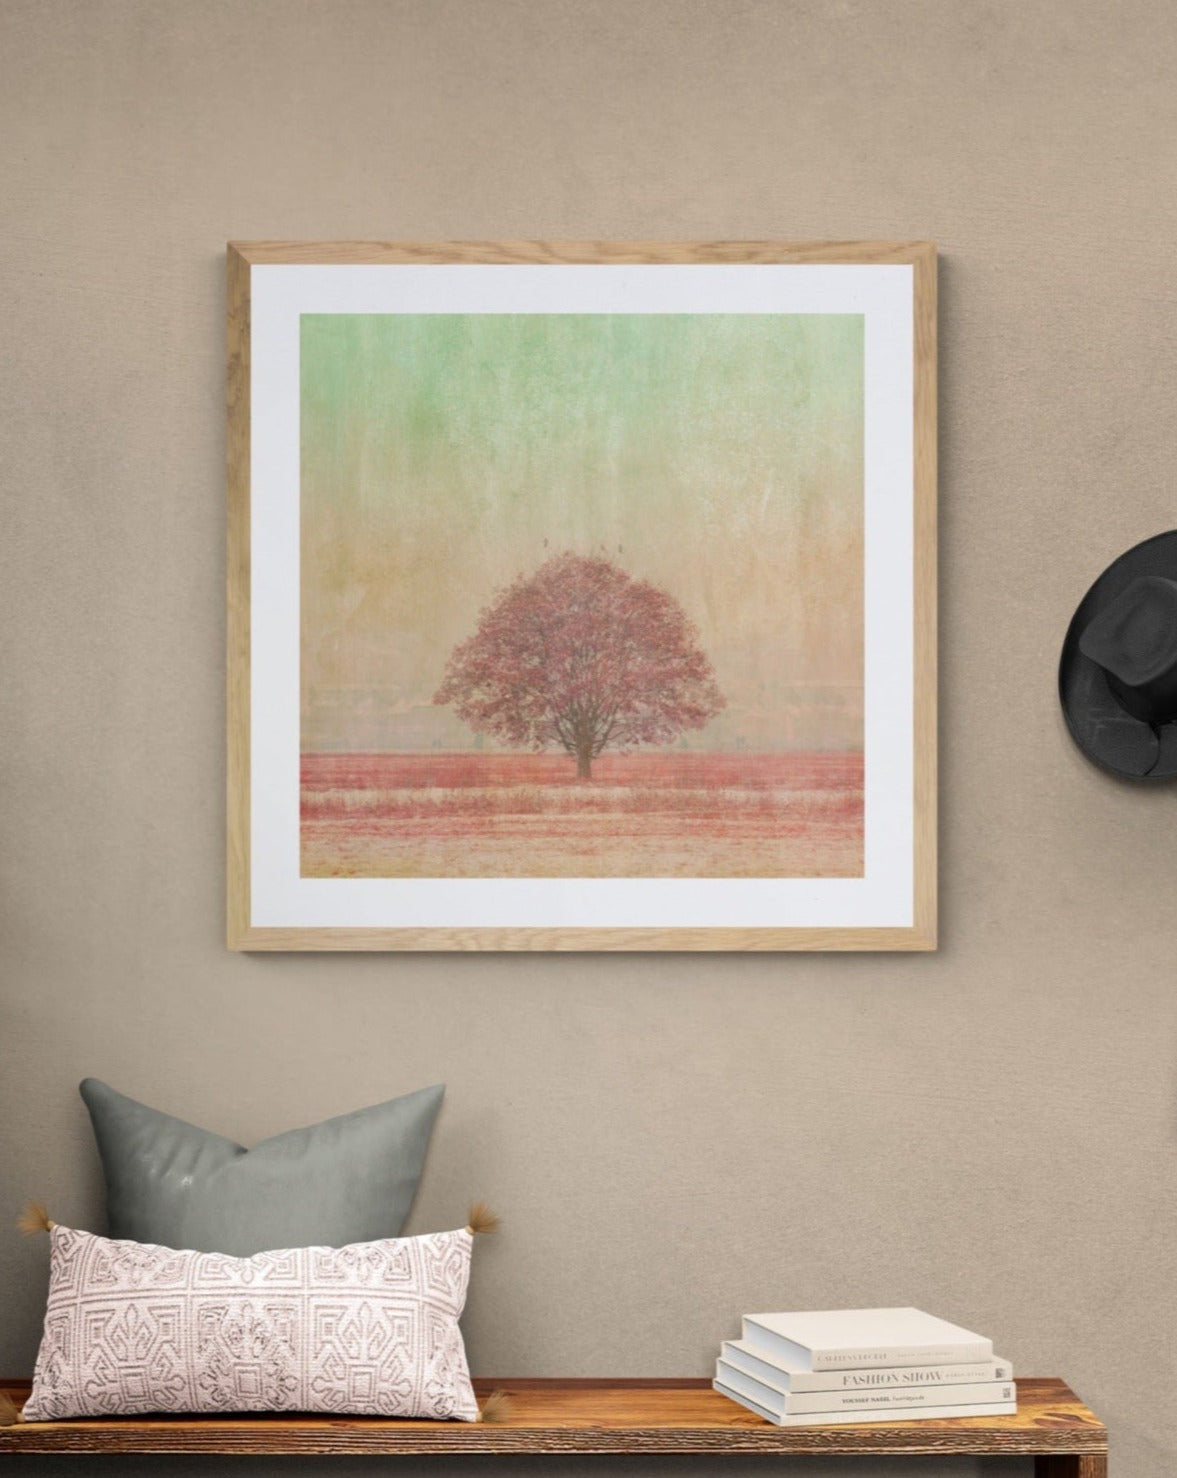 large photograph of pink tree and green sky.